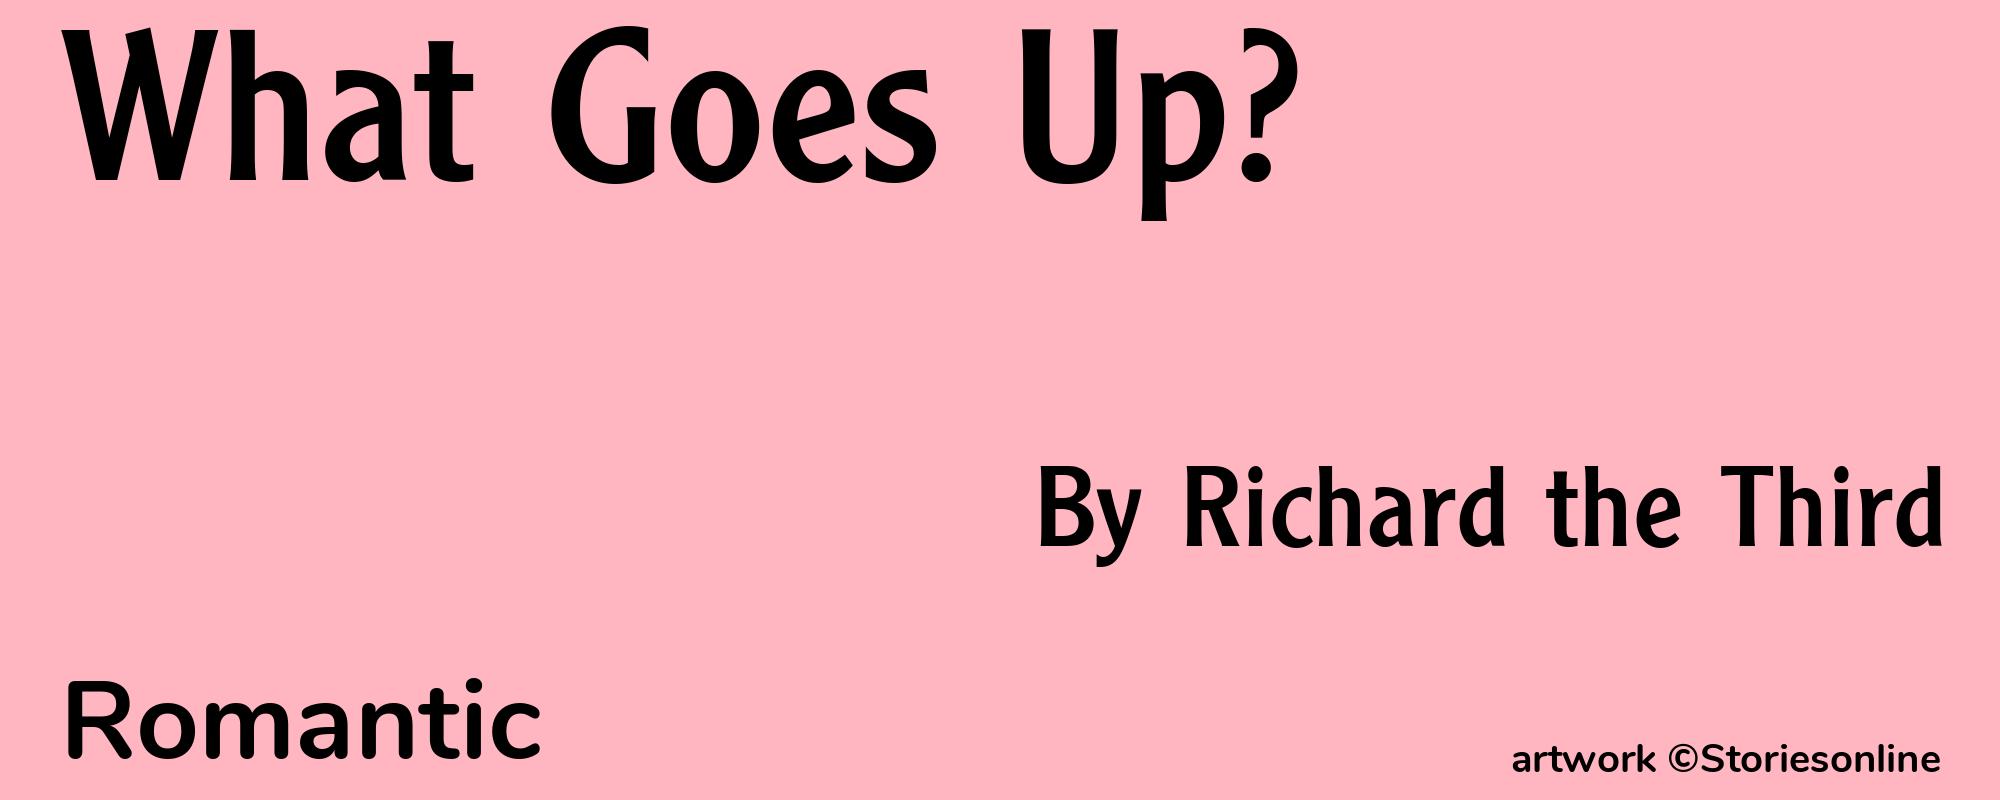 What Goes Up? - Cover